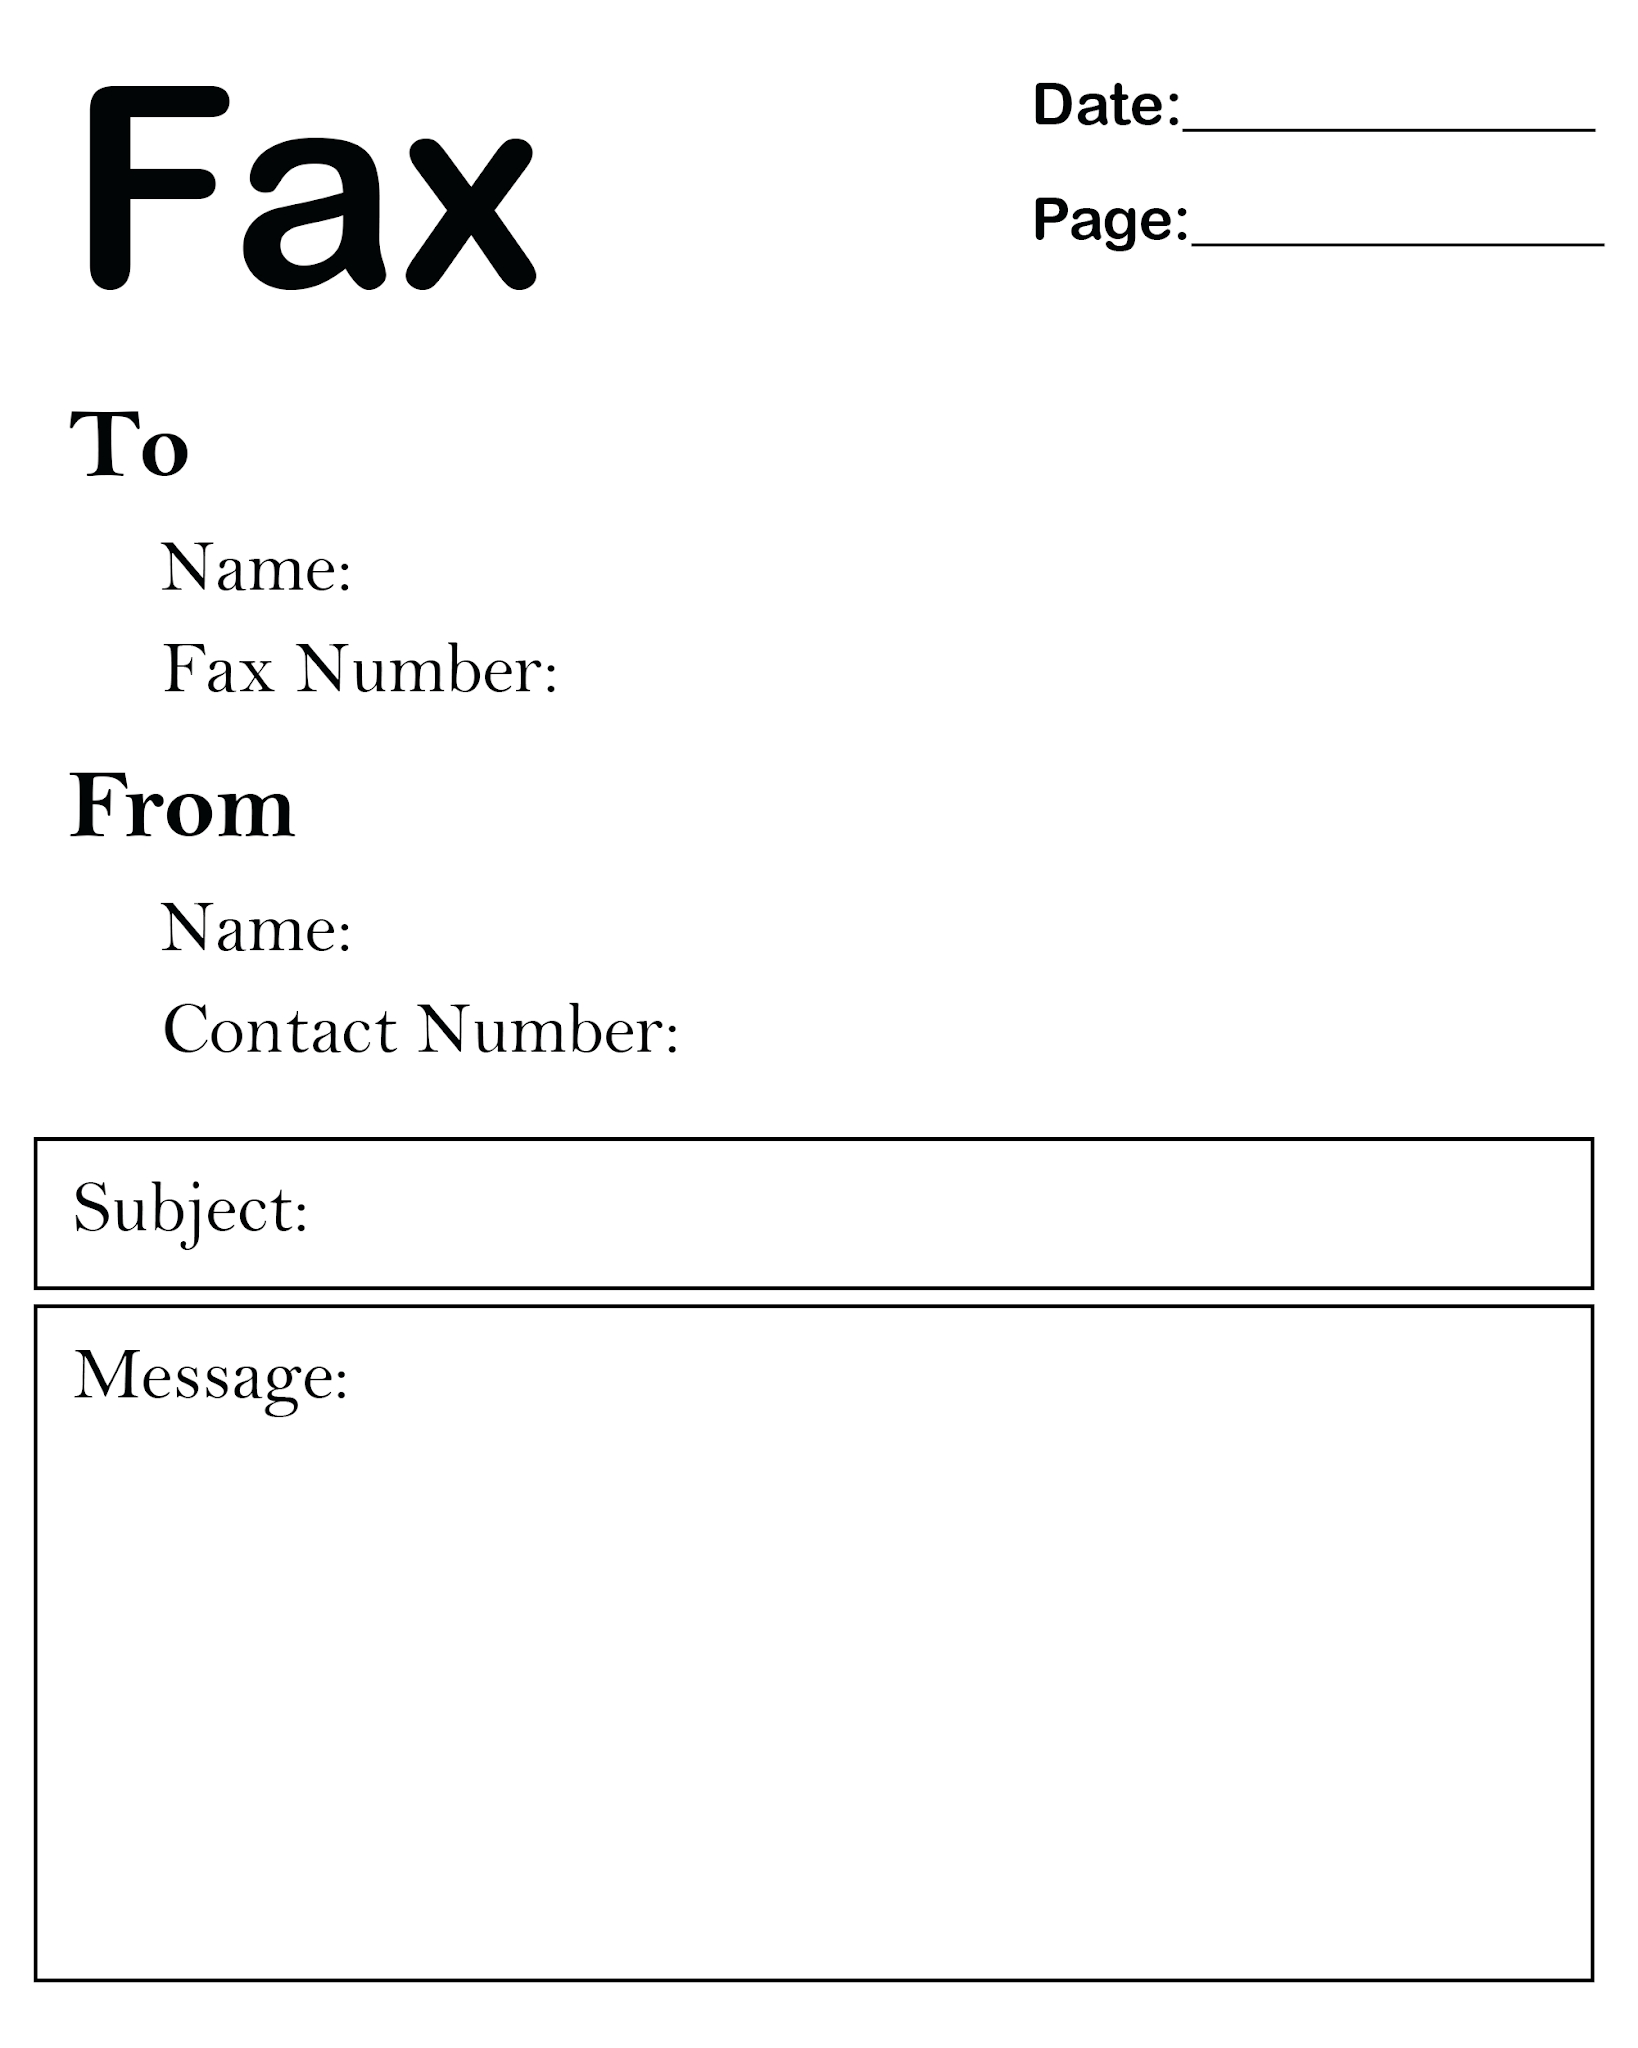 How To Create A Fax Cover Sheet In Word 2010 | Sample Letter Within Fax Template Word 2010